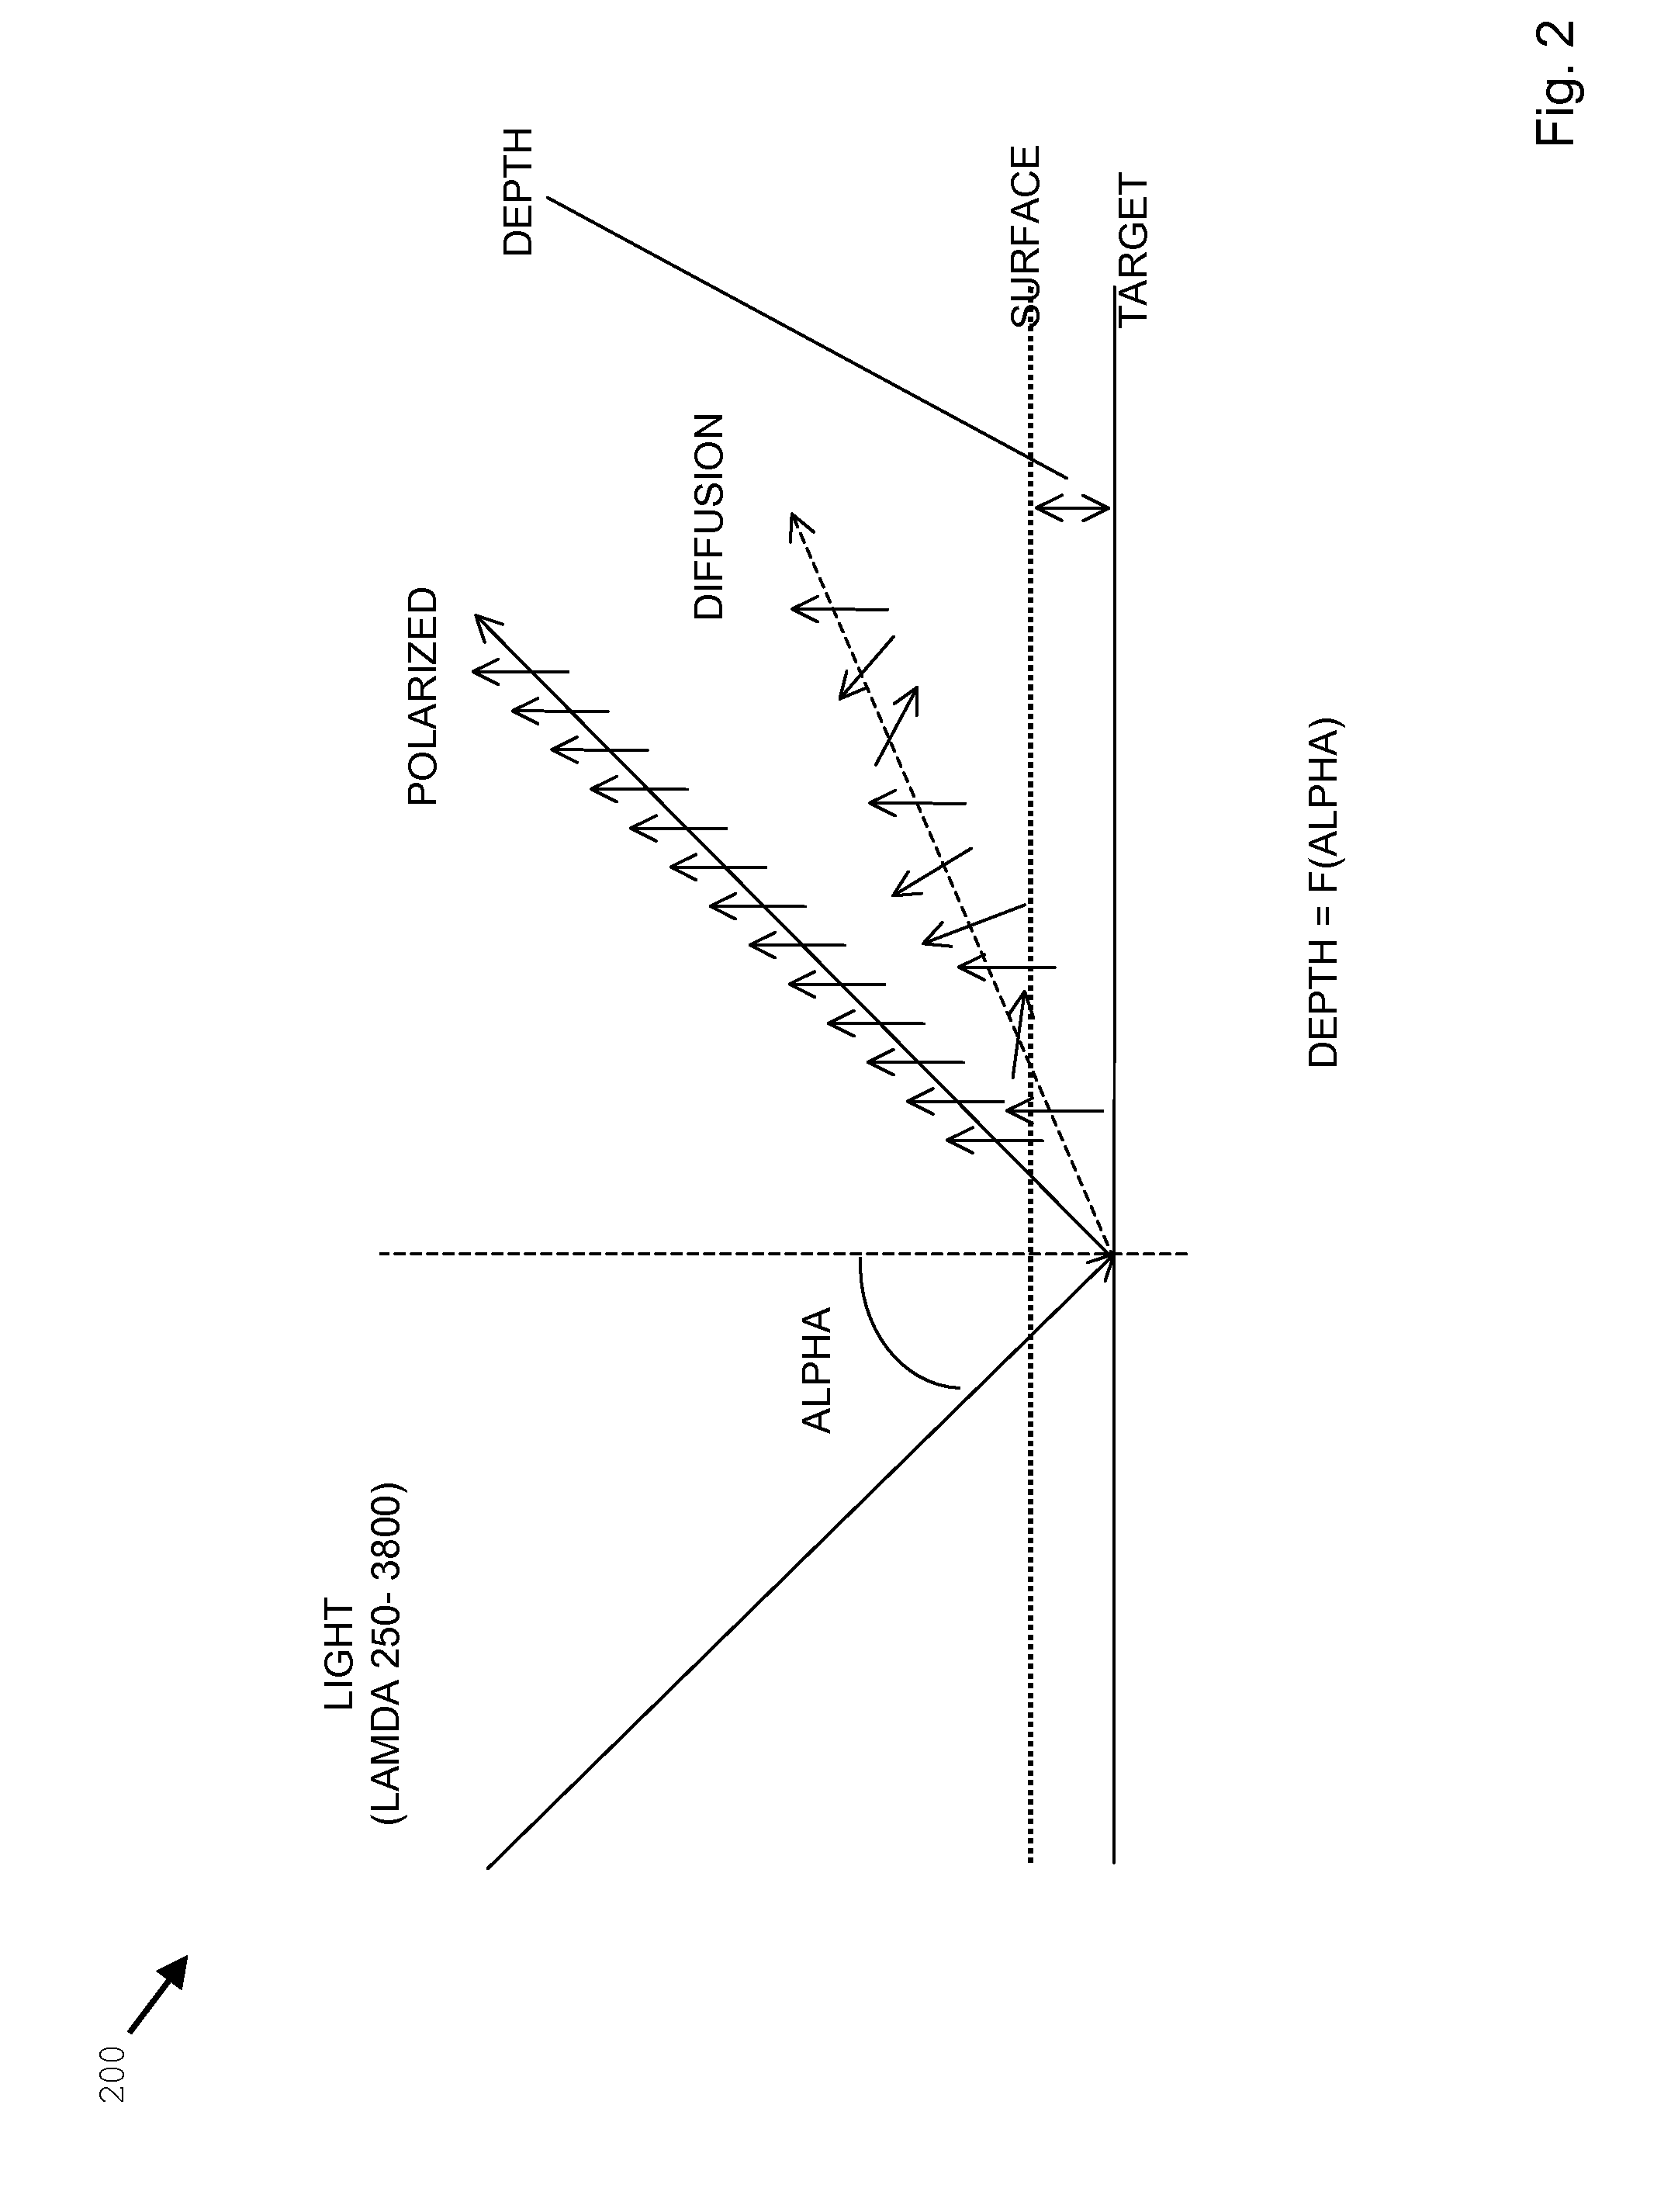 System, device, and method for dermal imaging